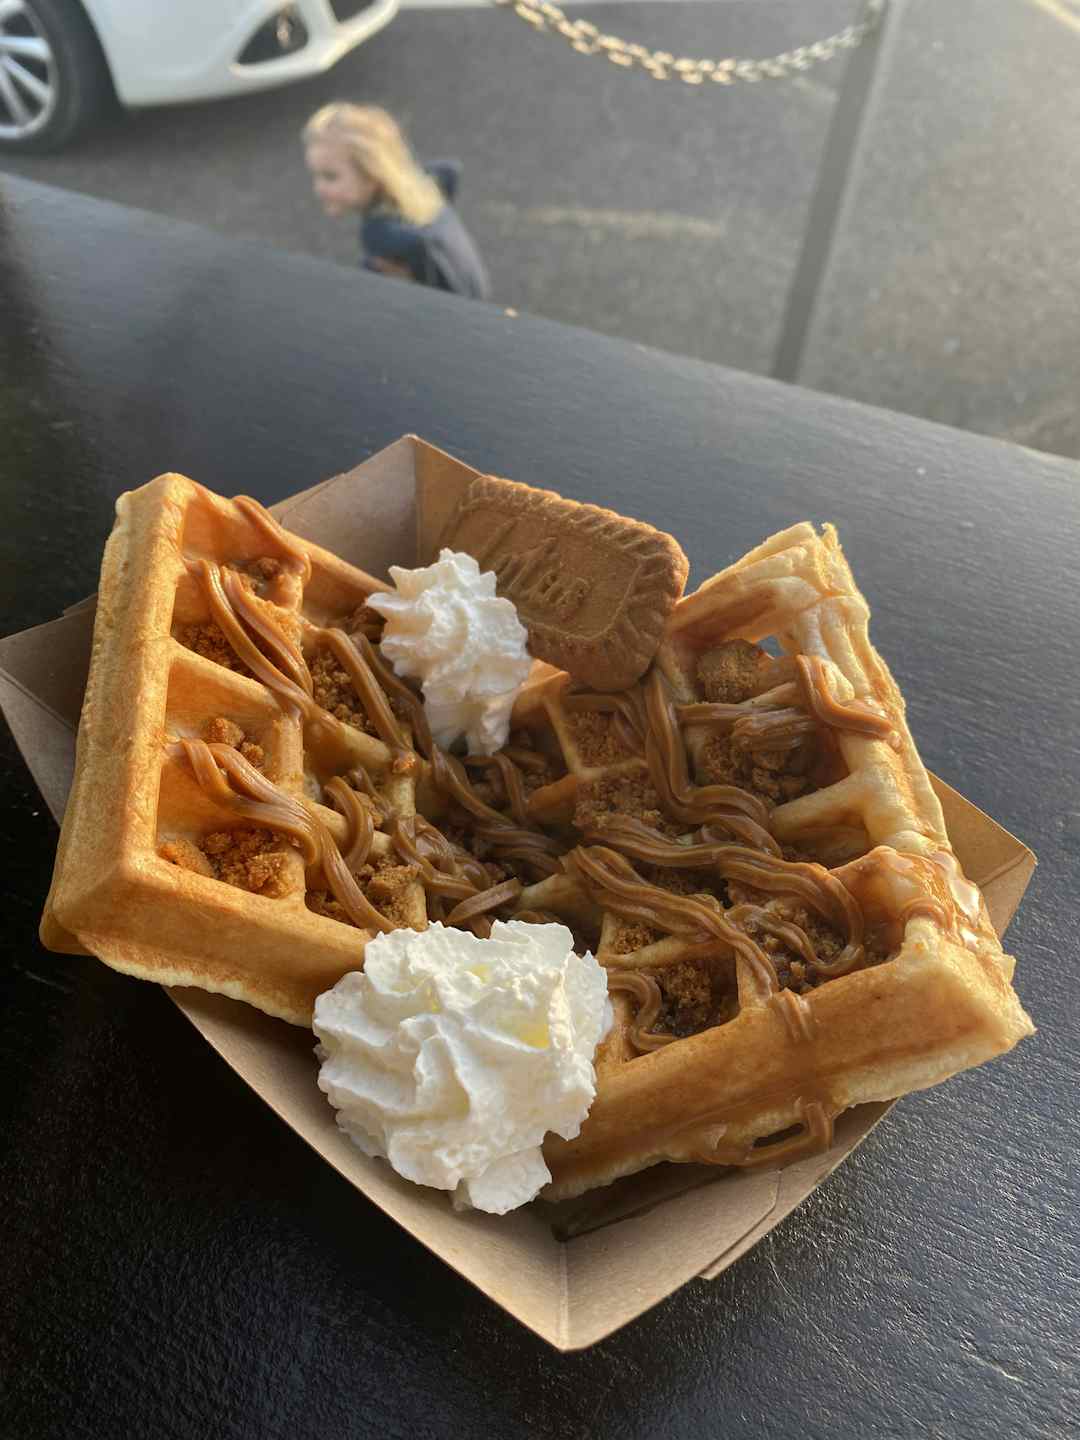 Hero image for supplier The Waffle Wagon